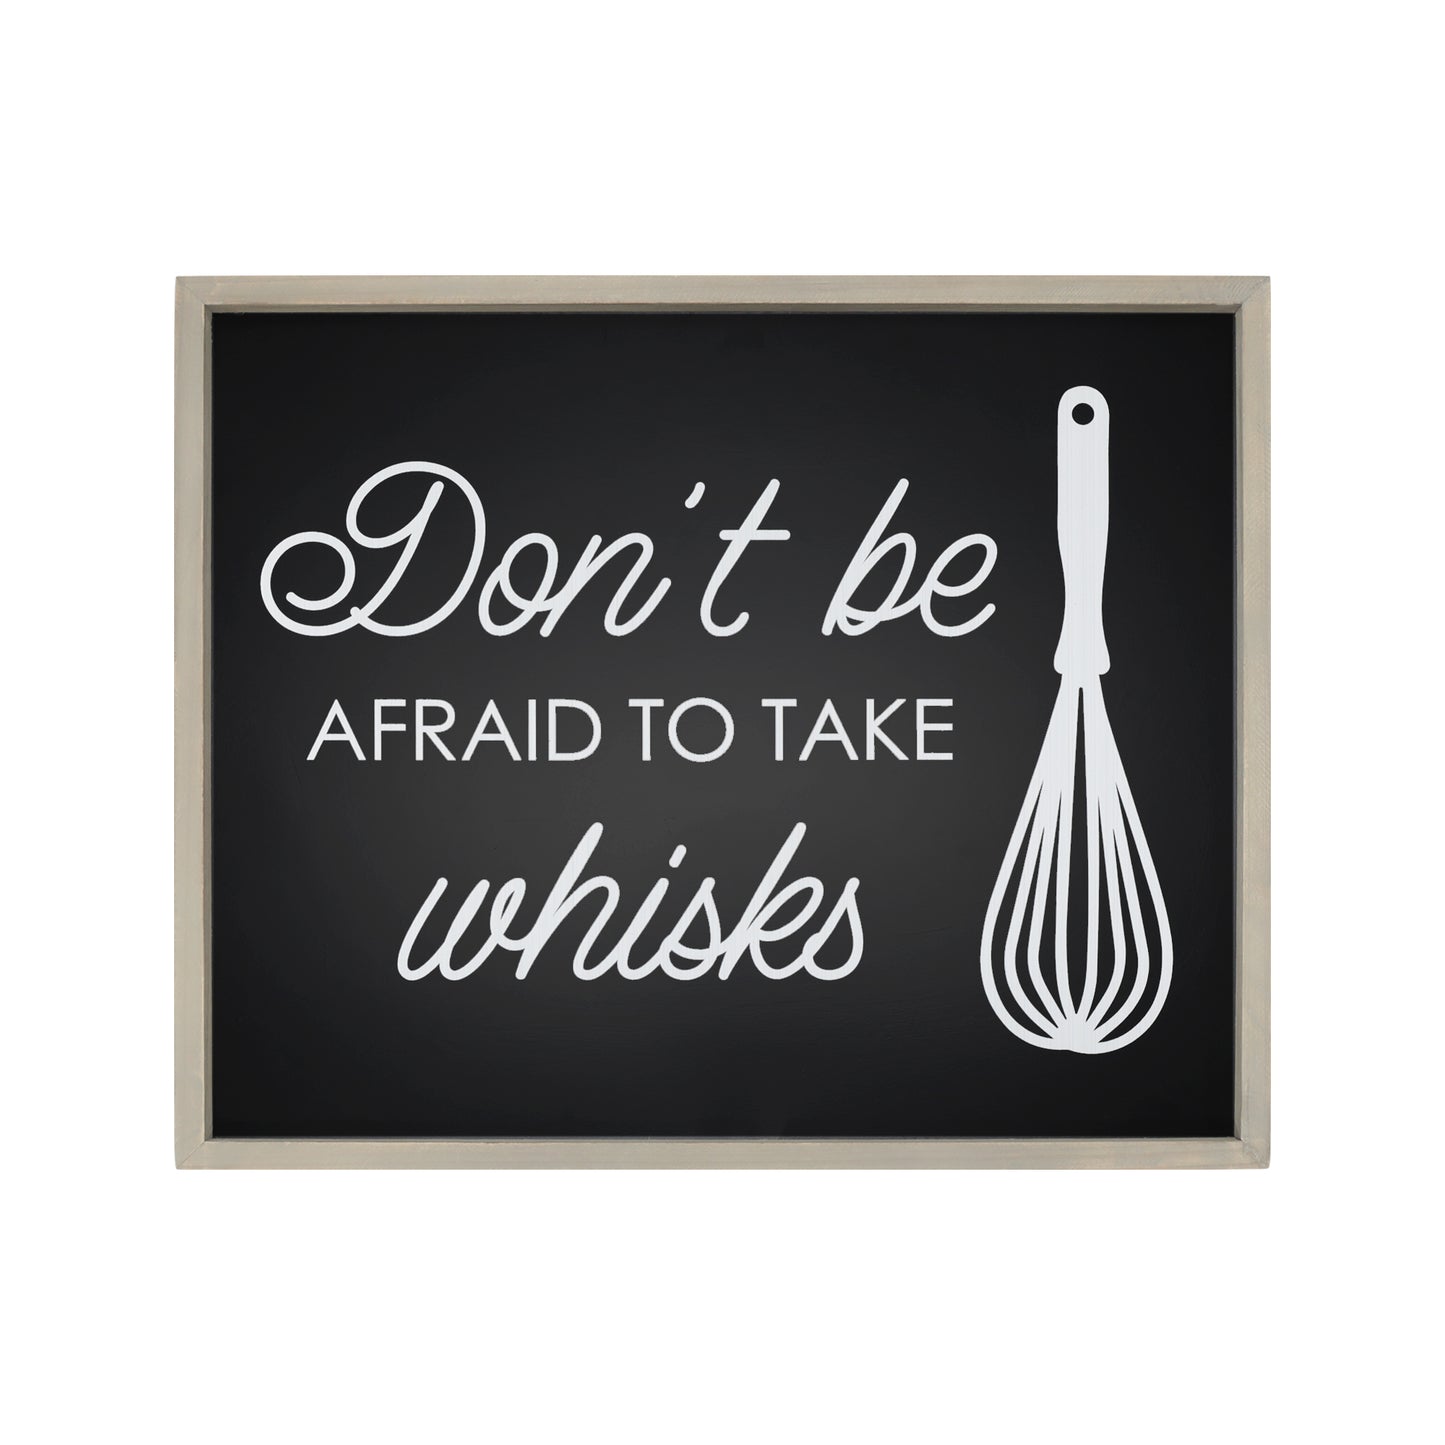 Cakes and Pastries Motivational Wall Art